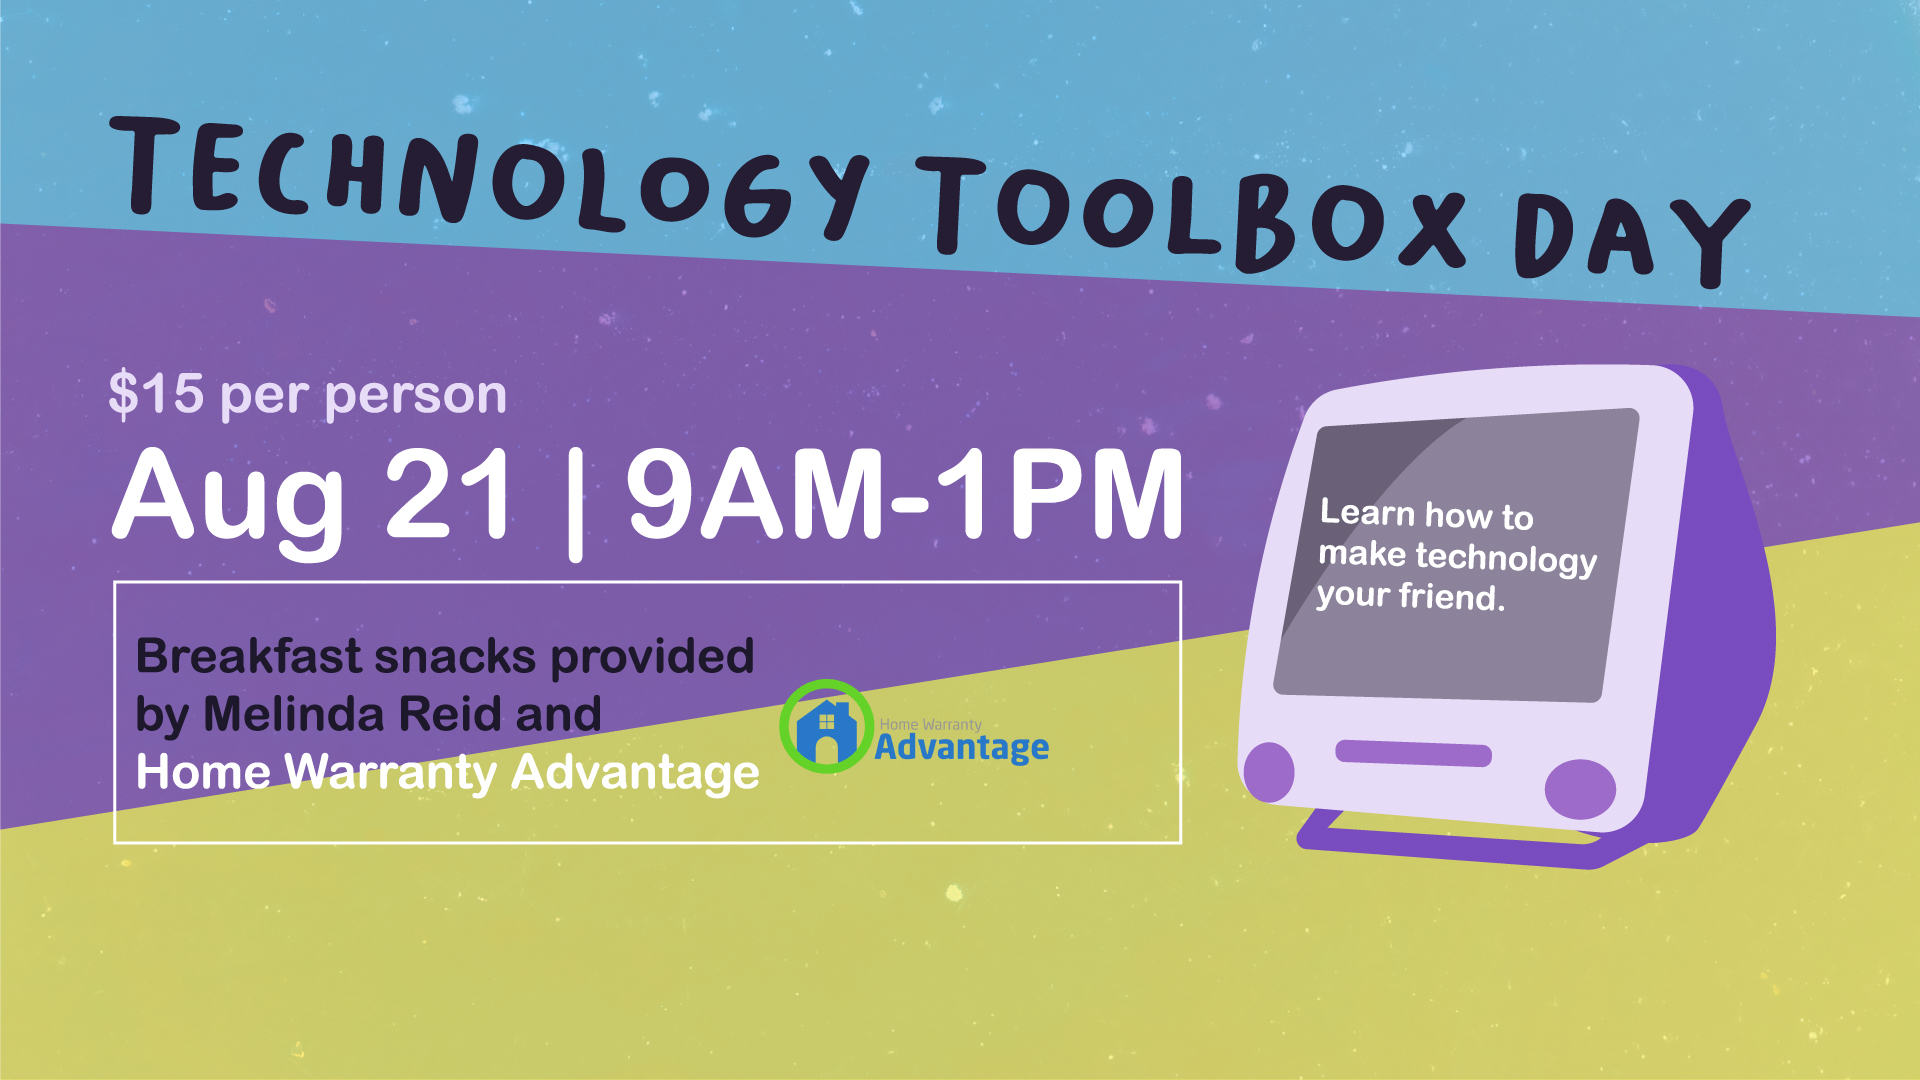 Technology Toolbox Day